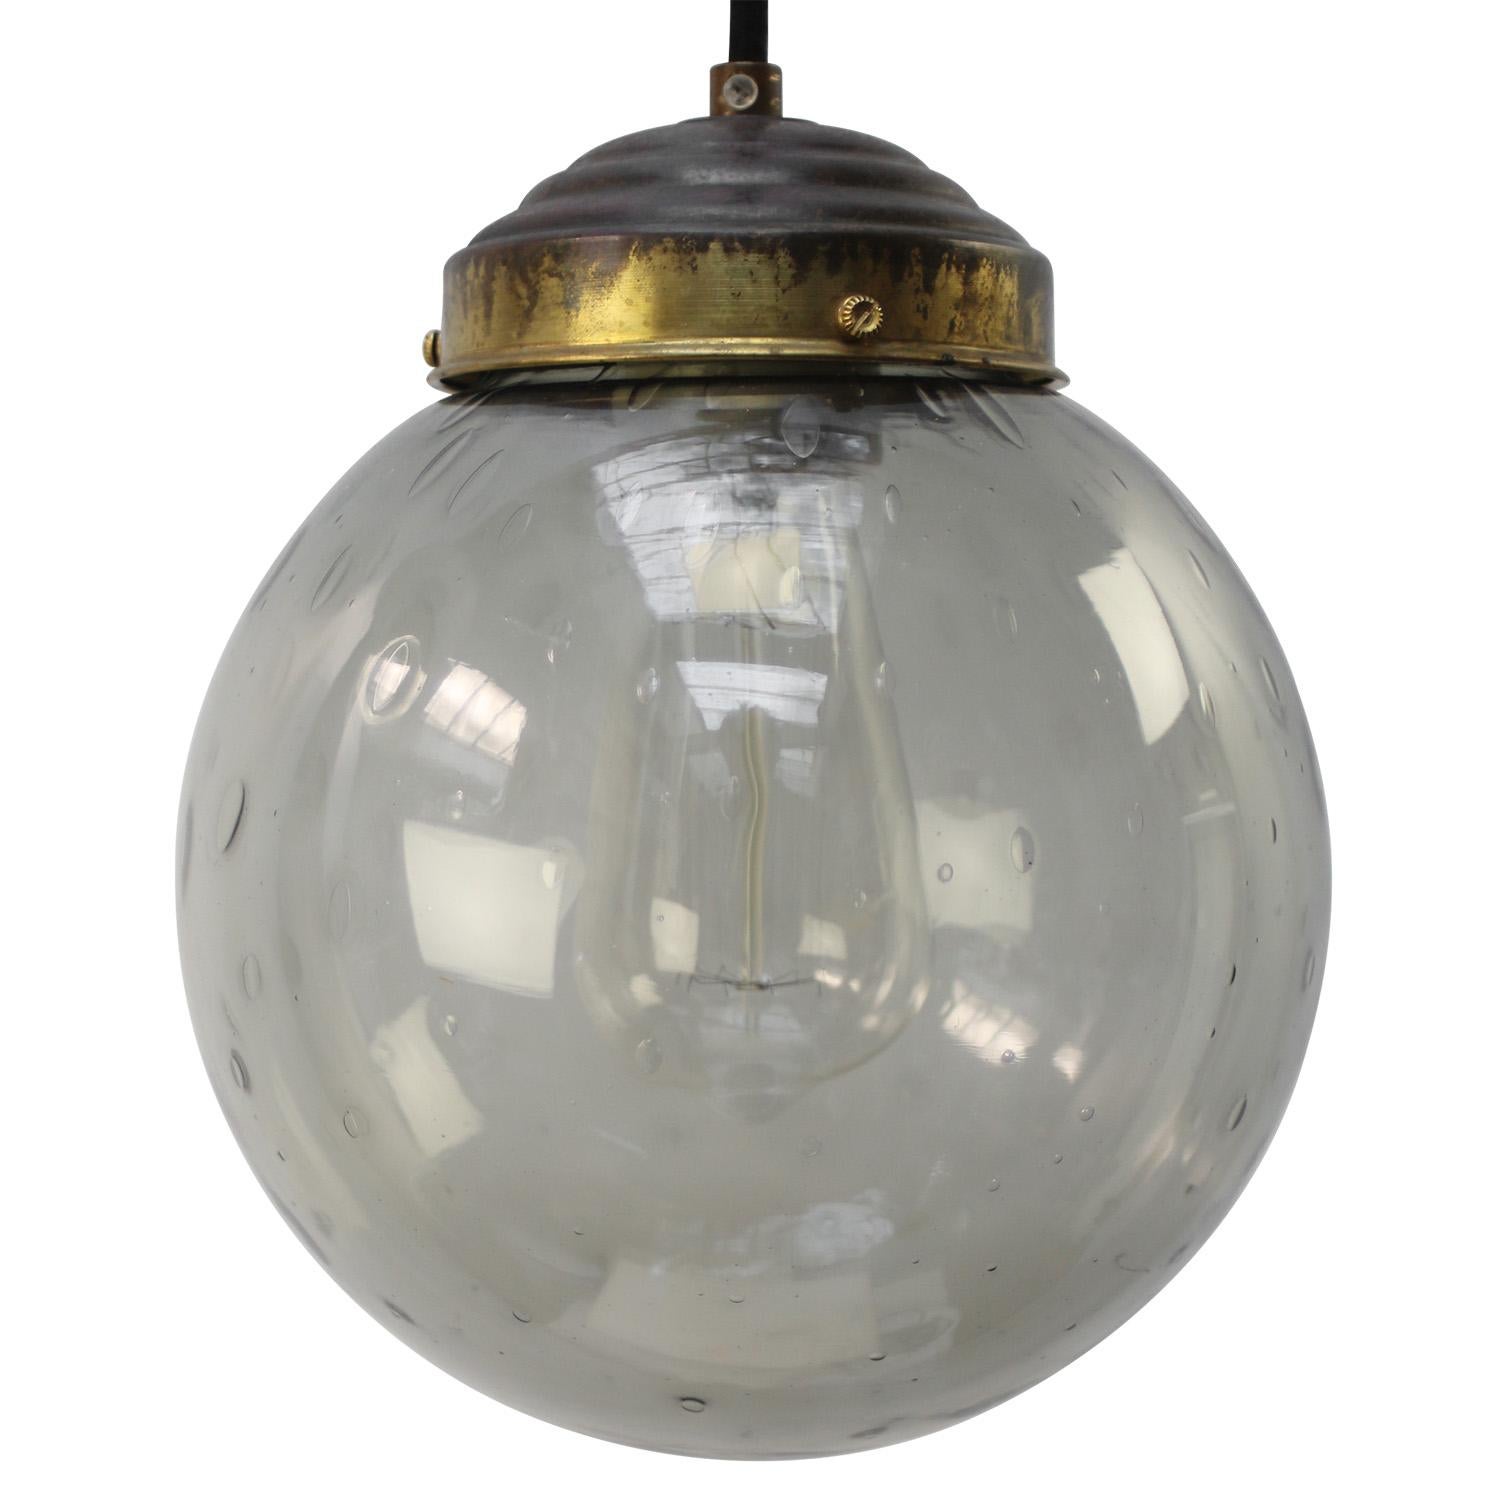 Original vintage smoked air bubble glass pendant.
2 meter Black wire
Brass top

Weight: 2.00 kg / 4.4 lb

Priced per individual item. All lamps have been made suitable by international standards for incandescent light bulbs, energy-efficient